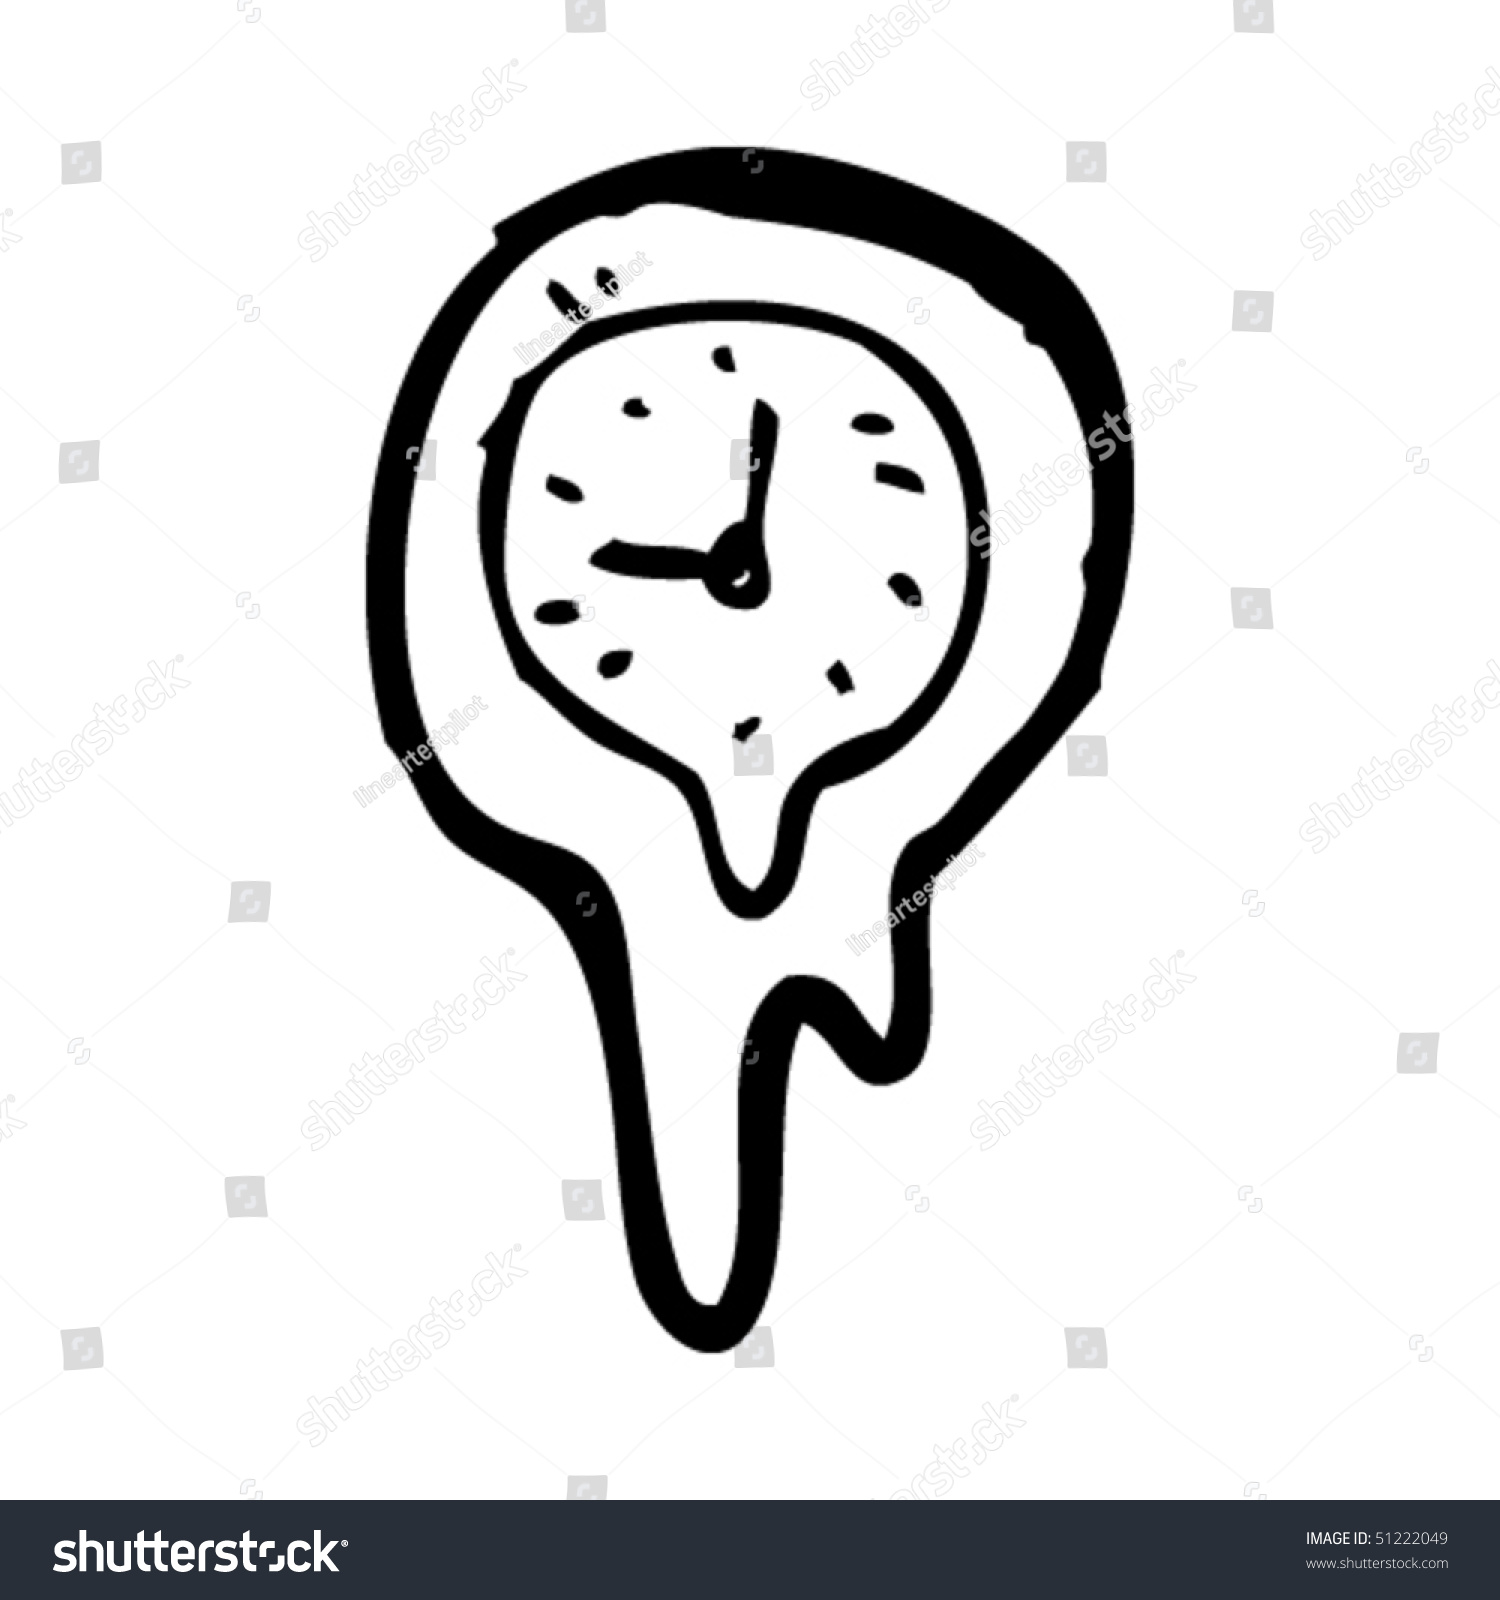 Quirky Drawing Of A Melting Clock Stock Vector Illustration 51222049